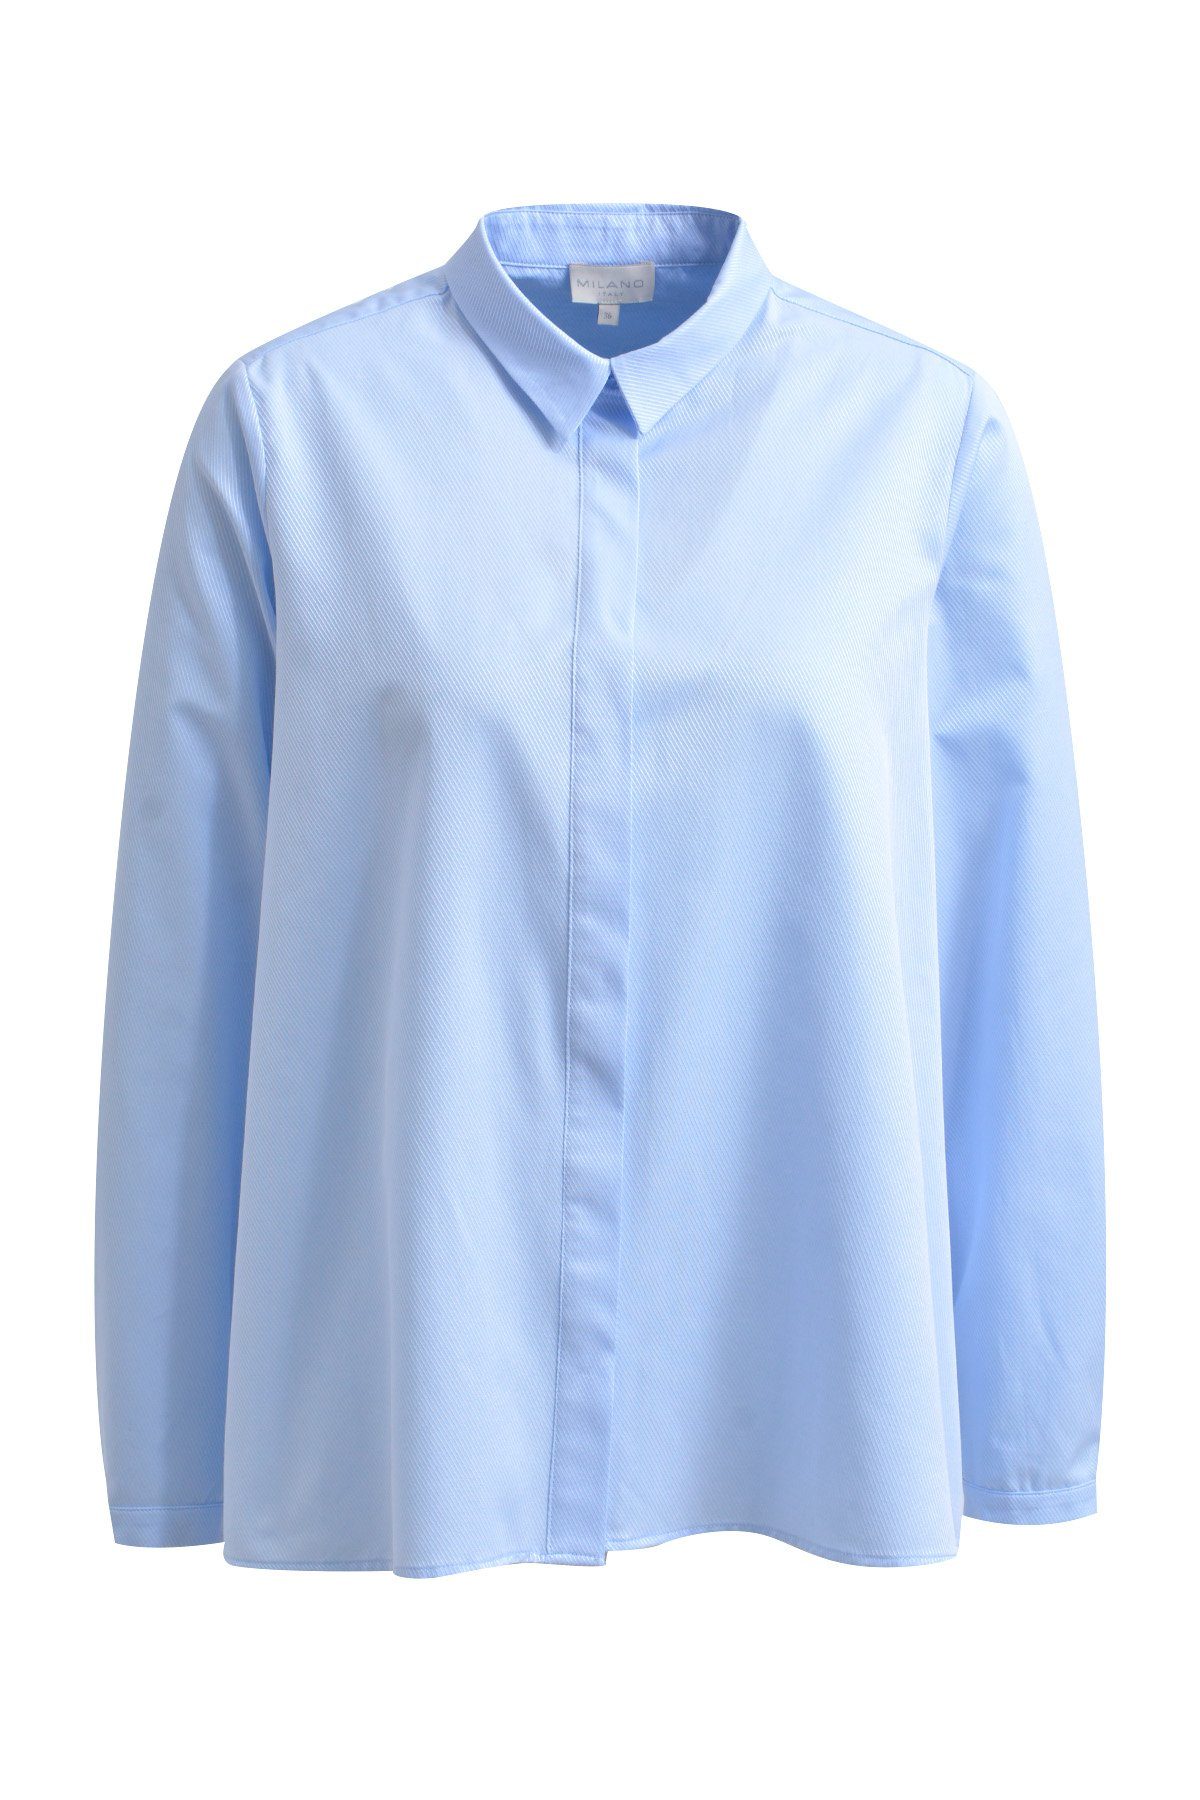 PLACKET AN Blusentop COVERED Italy W COLLAR, BLOUSE Milano